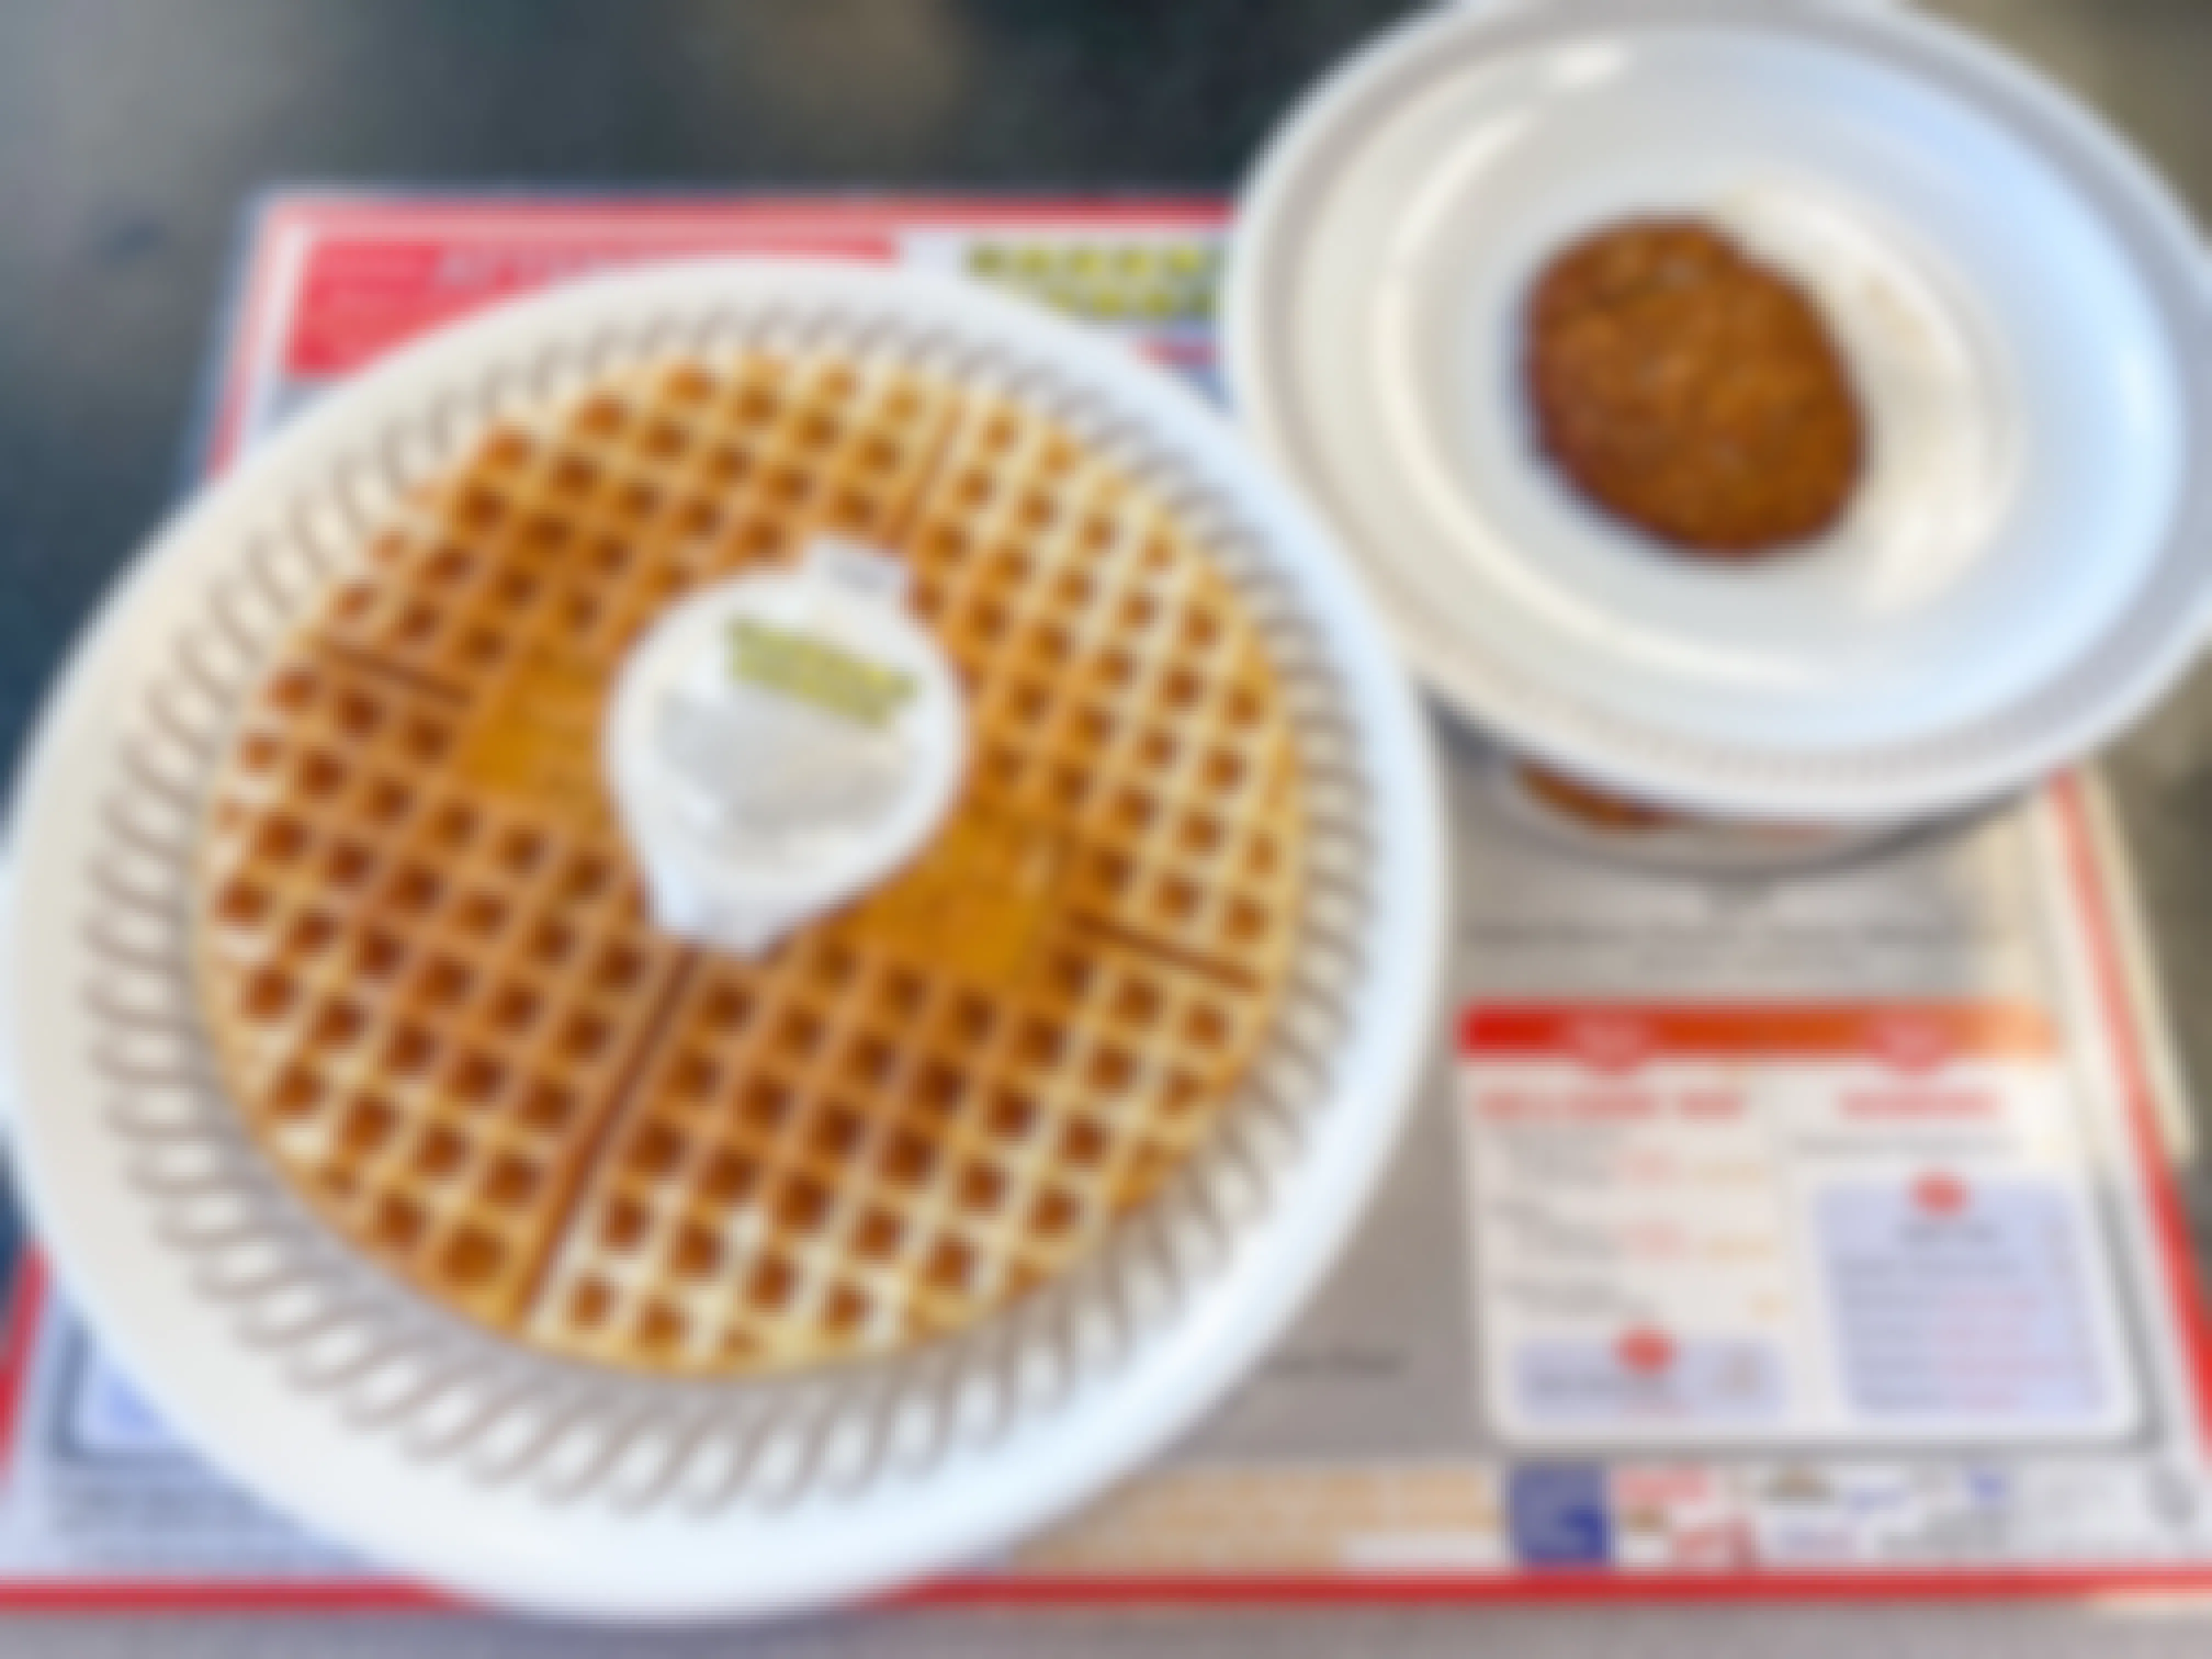 A plate with a big waffle and a container of Waffle House butter sitting next to another plate with a sausage patty on a table at Waffle House.